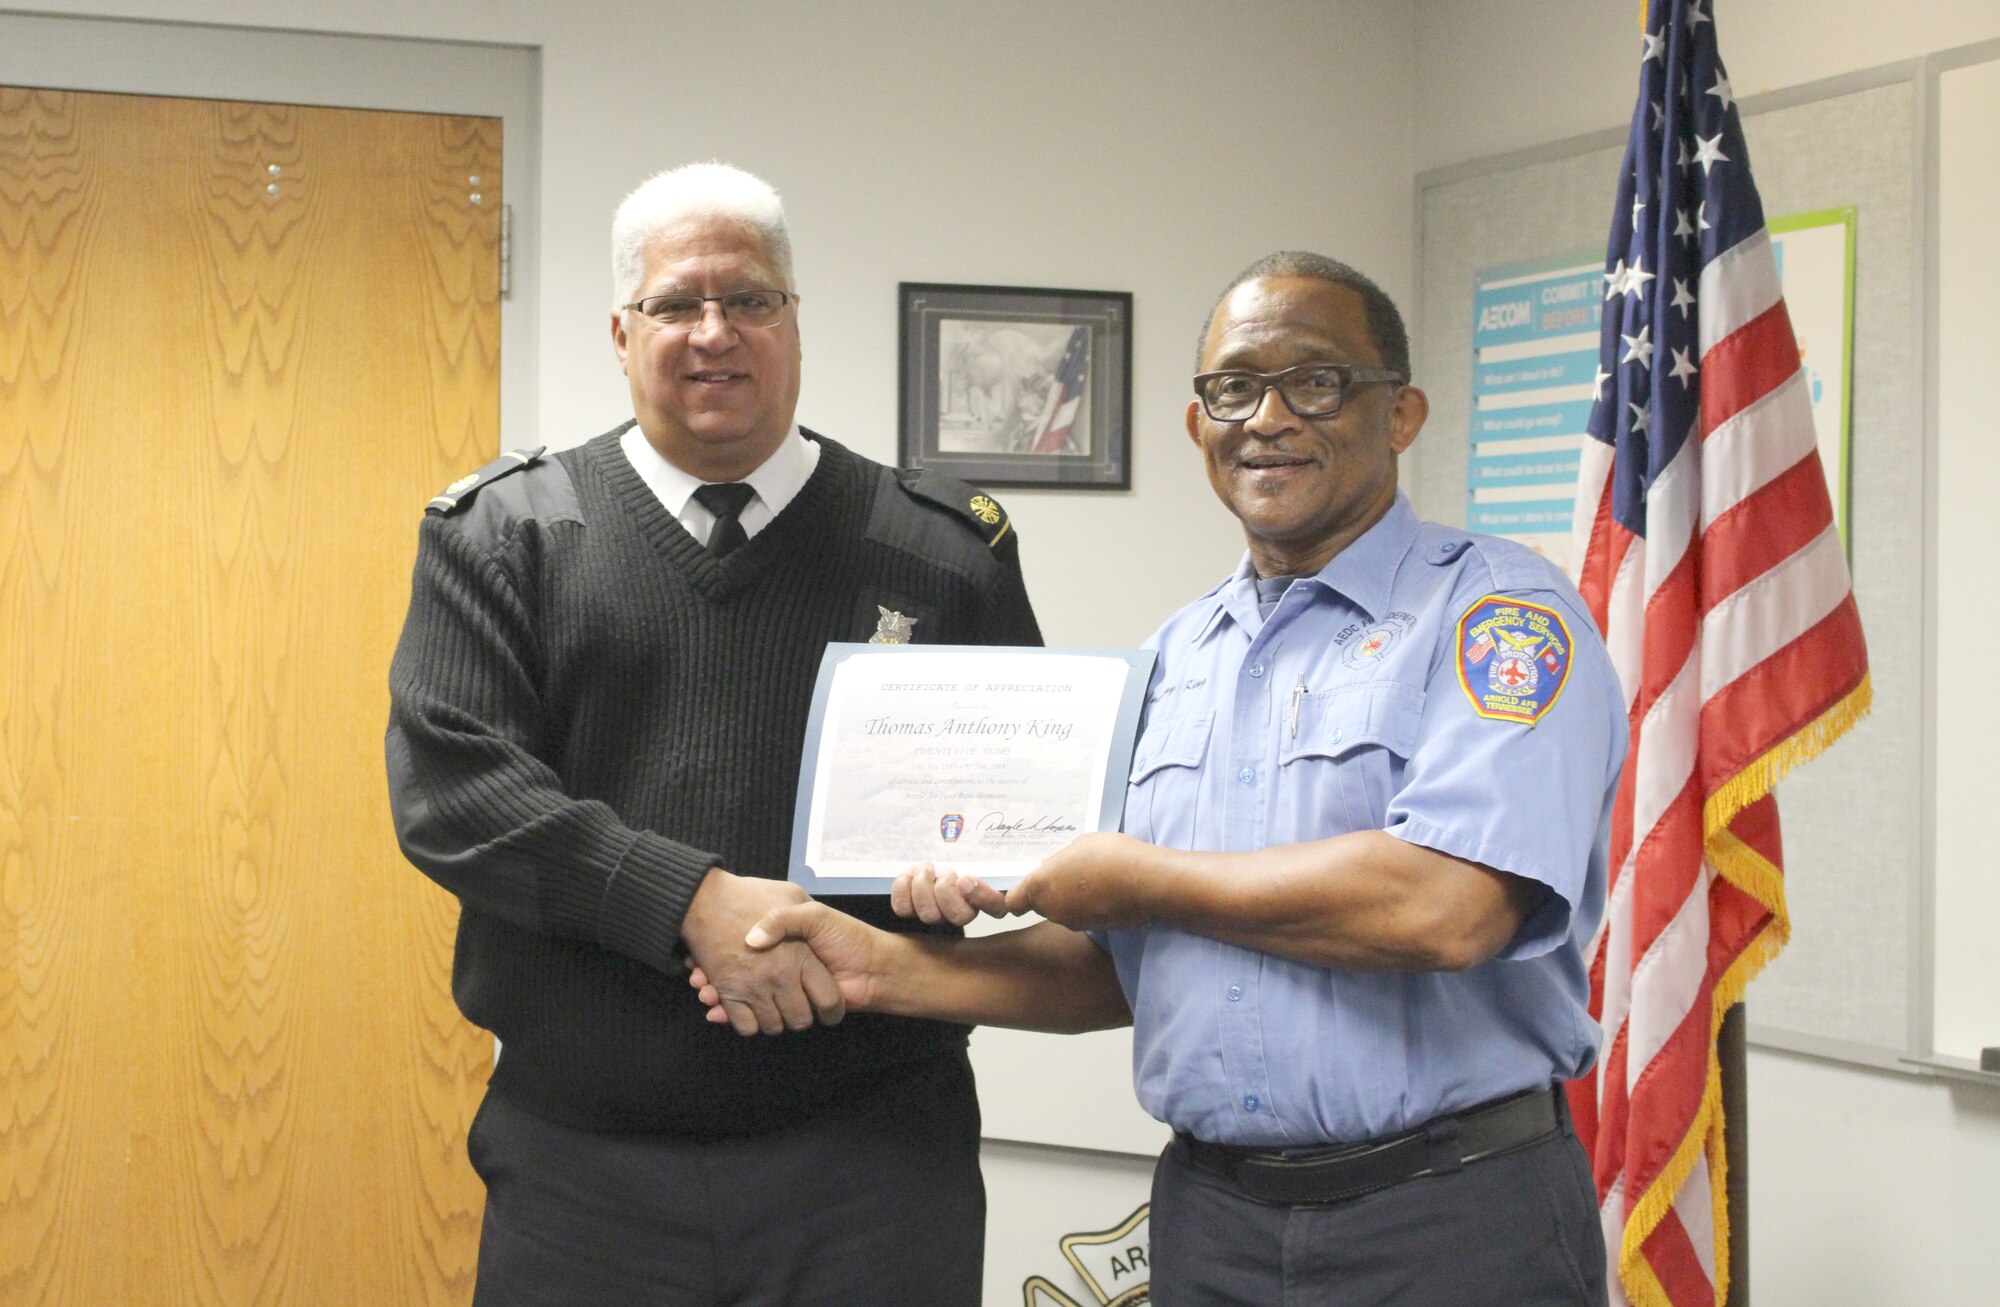 Thomas Anthony King, right, firefighter for Arnold Air Force Base Fire and Emergency Services, receives a certificate recognizing his 25 years of service from Daryle Lopes, chief of Arnold Fire and Emergency Services. (U.S. Air Force photo by Deidre Ortiz)